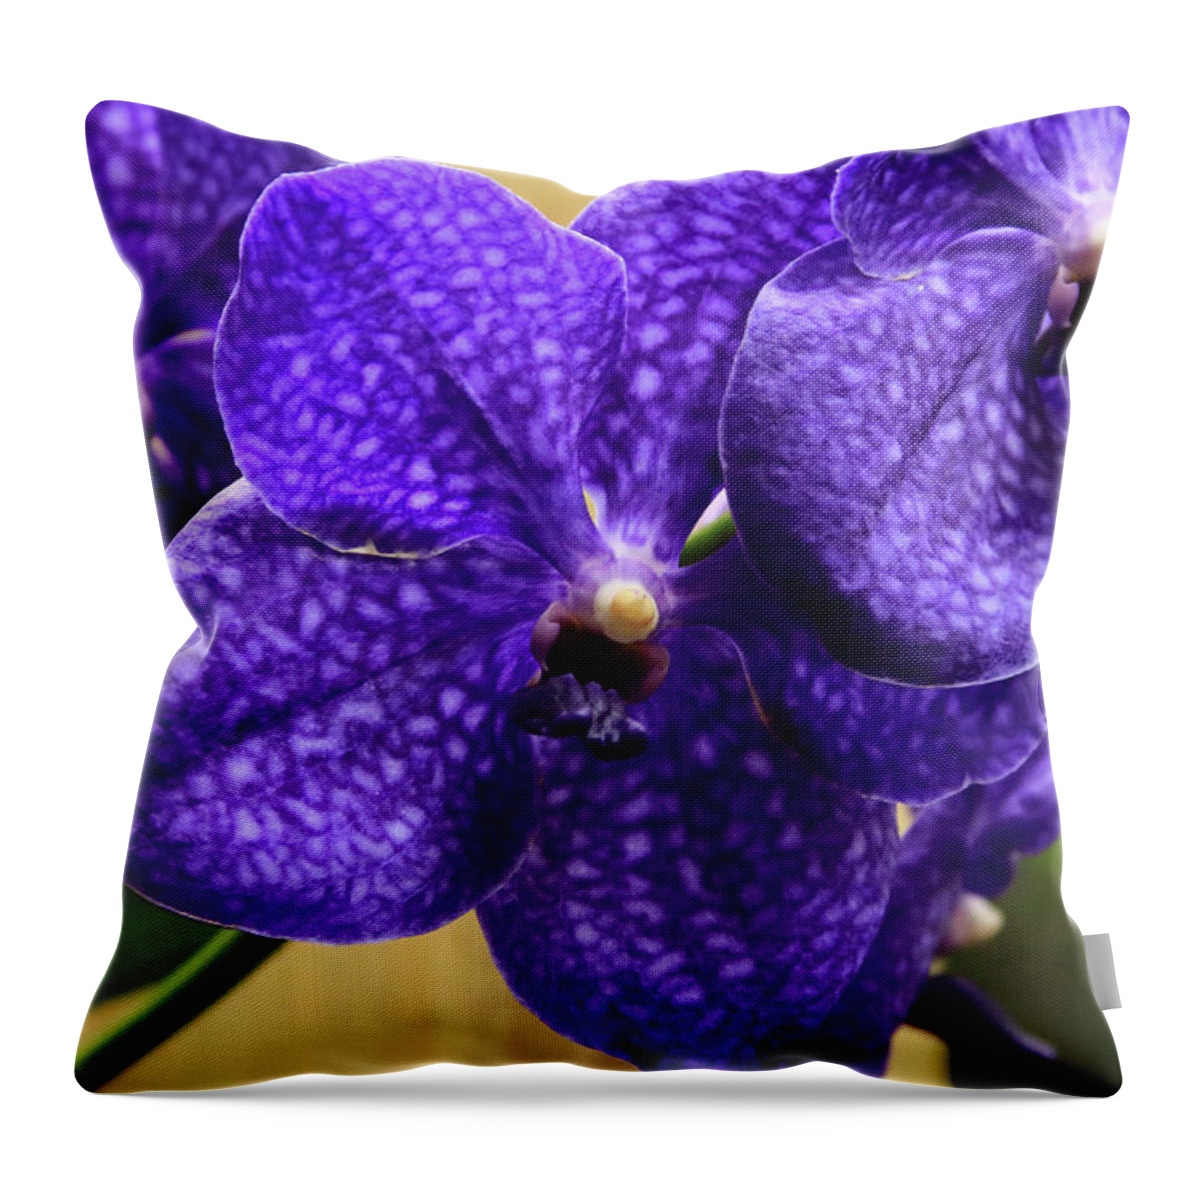 China Throw Pillow featuring the photograph Vanda Orchid by Tanya Owens